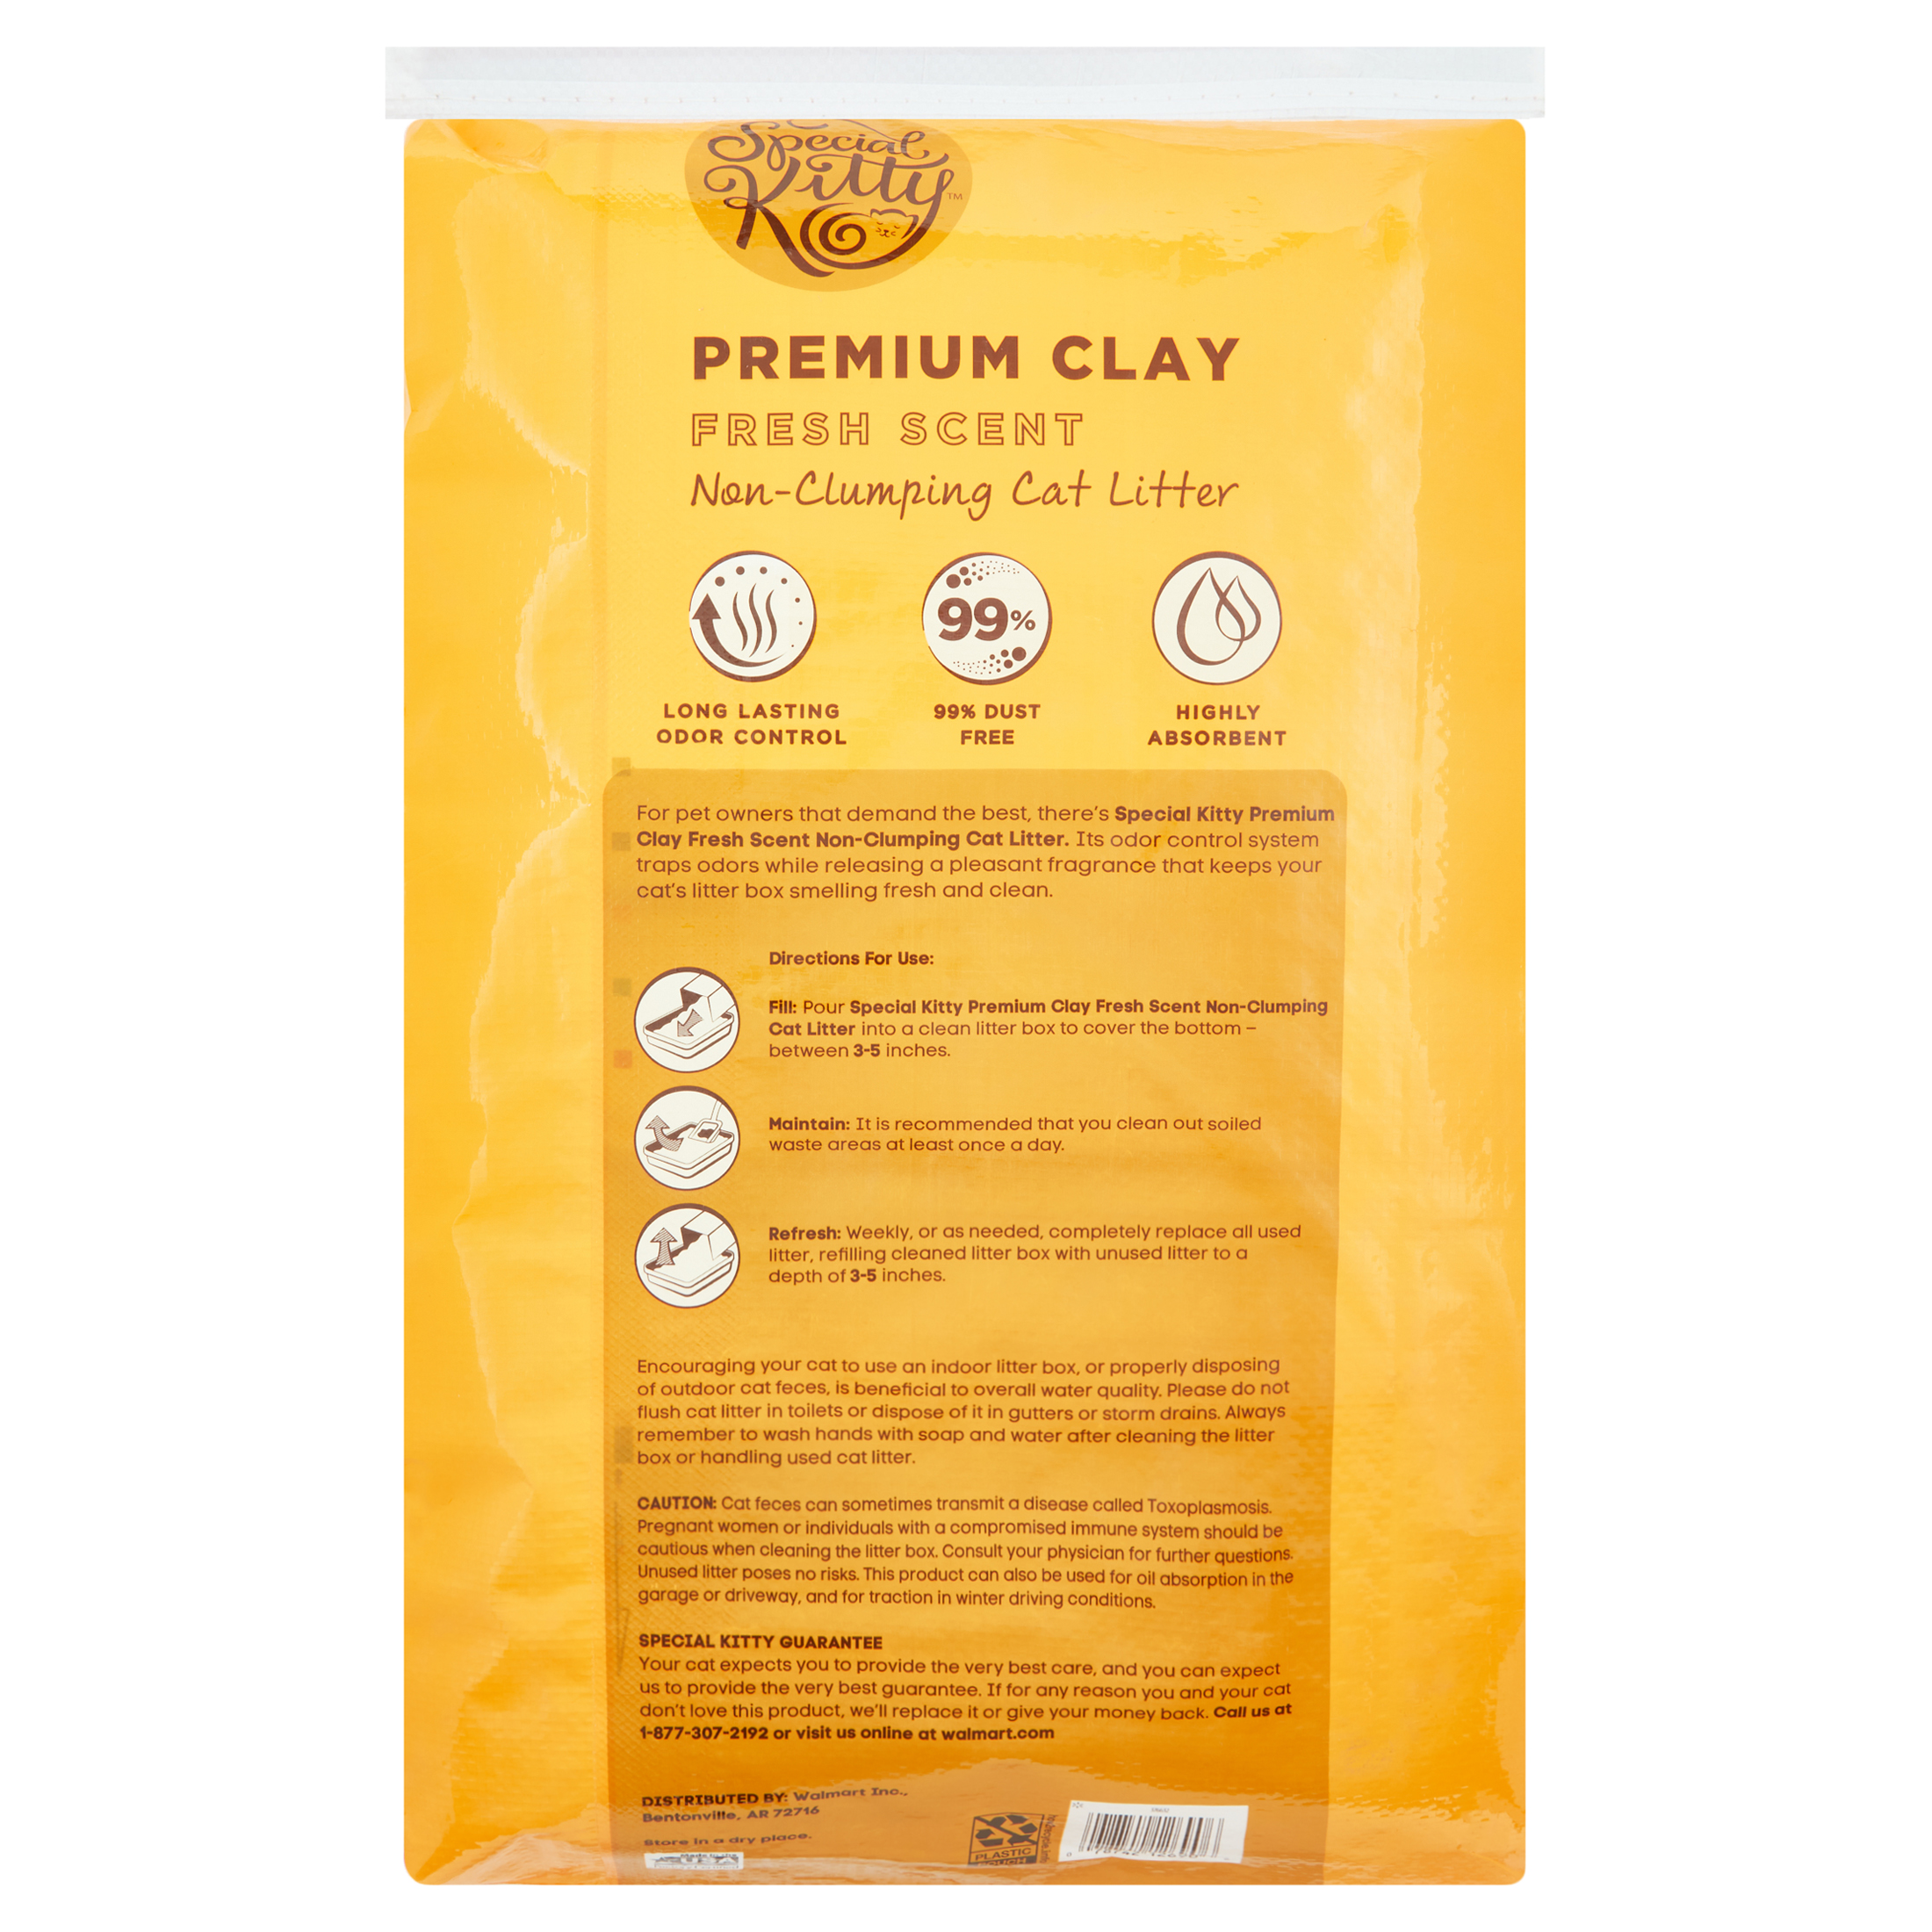 Special Kitty Premium Clay Non-Clumping Cat Litter, Fresh Scent, 25 lb - image 2 of 7